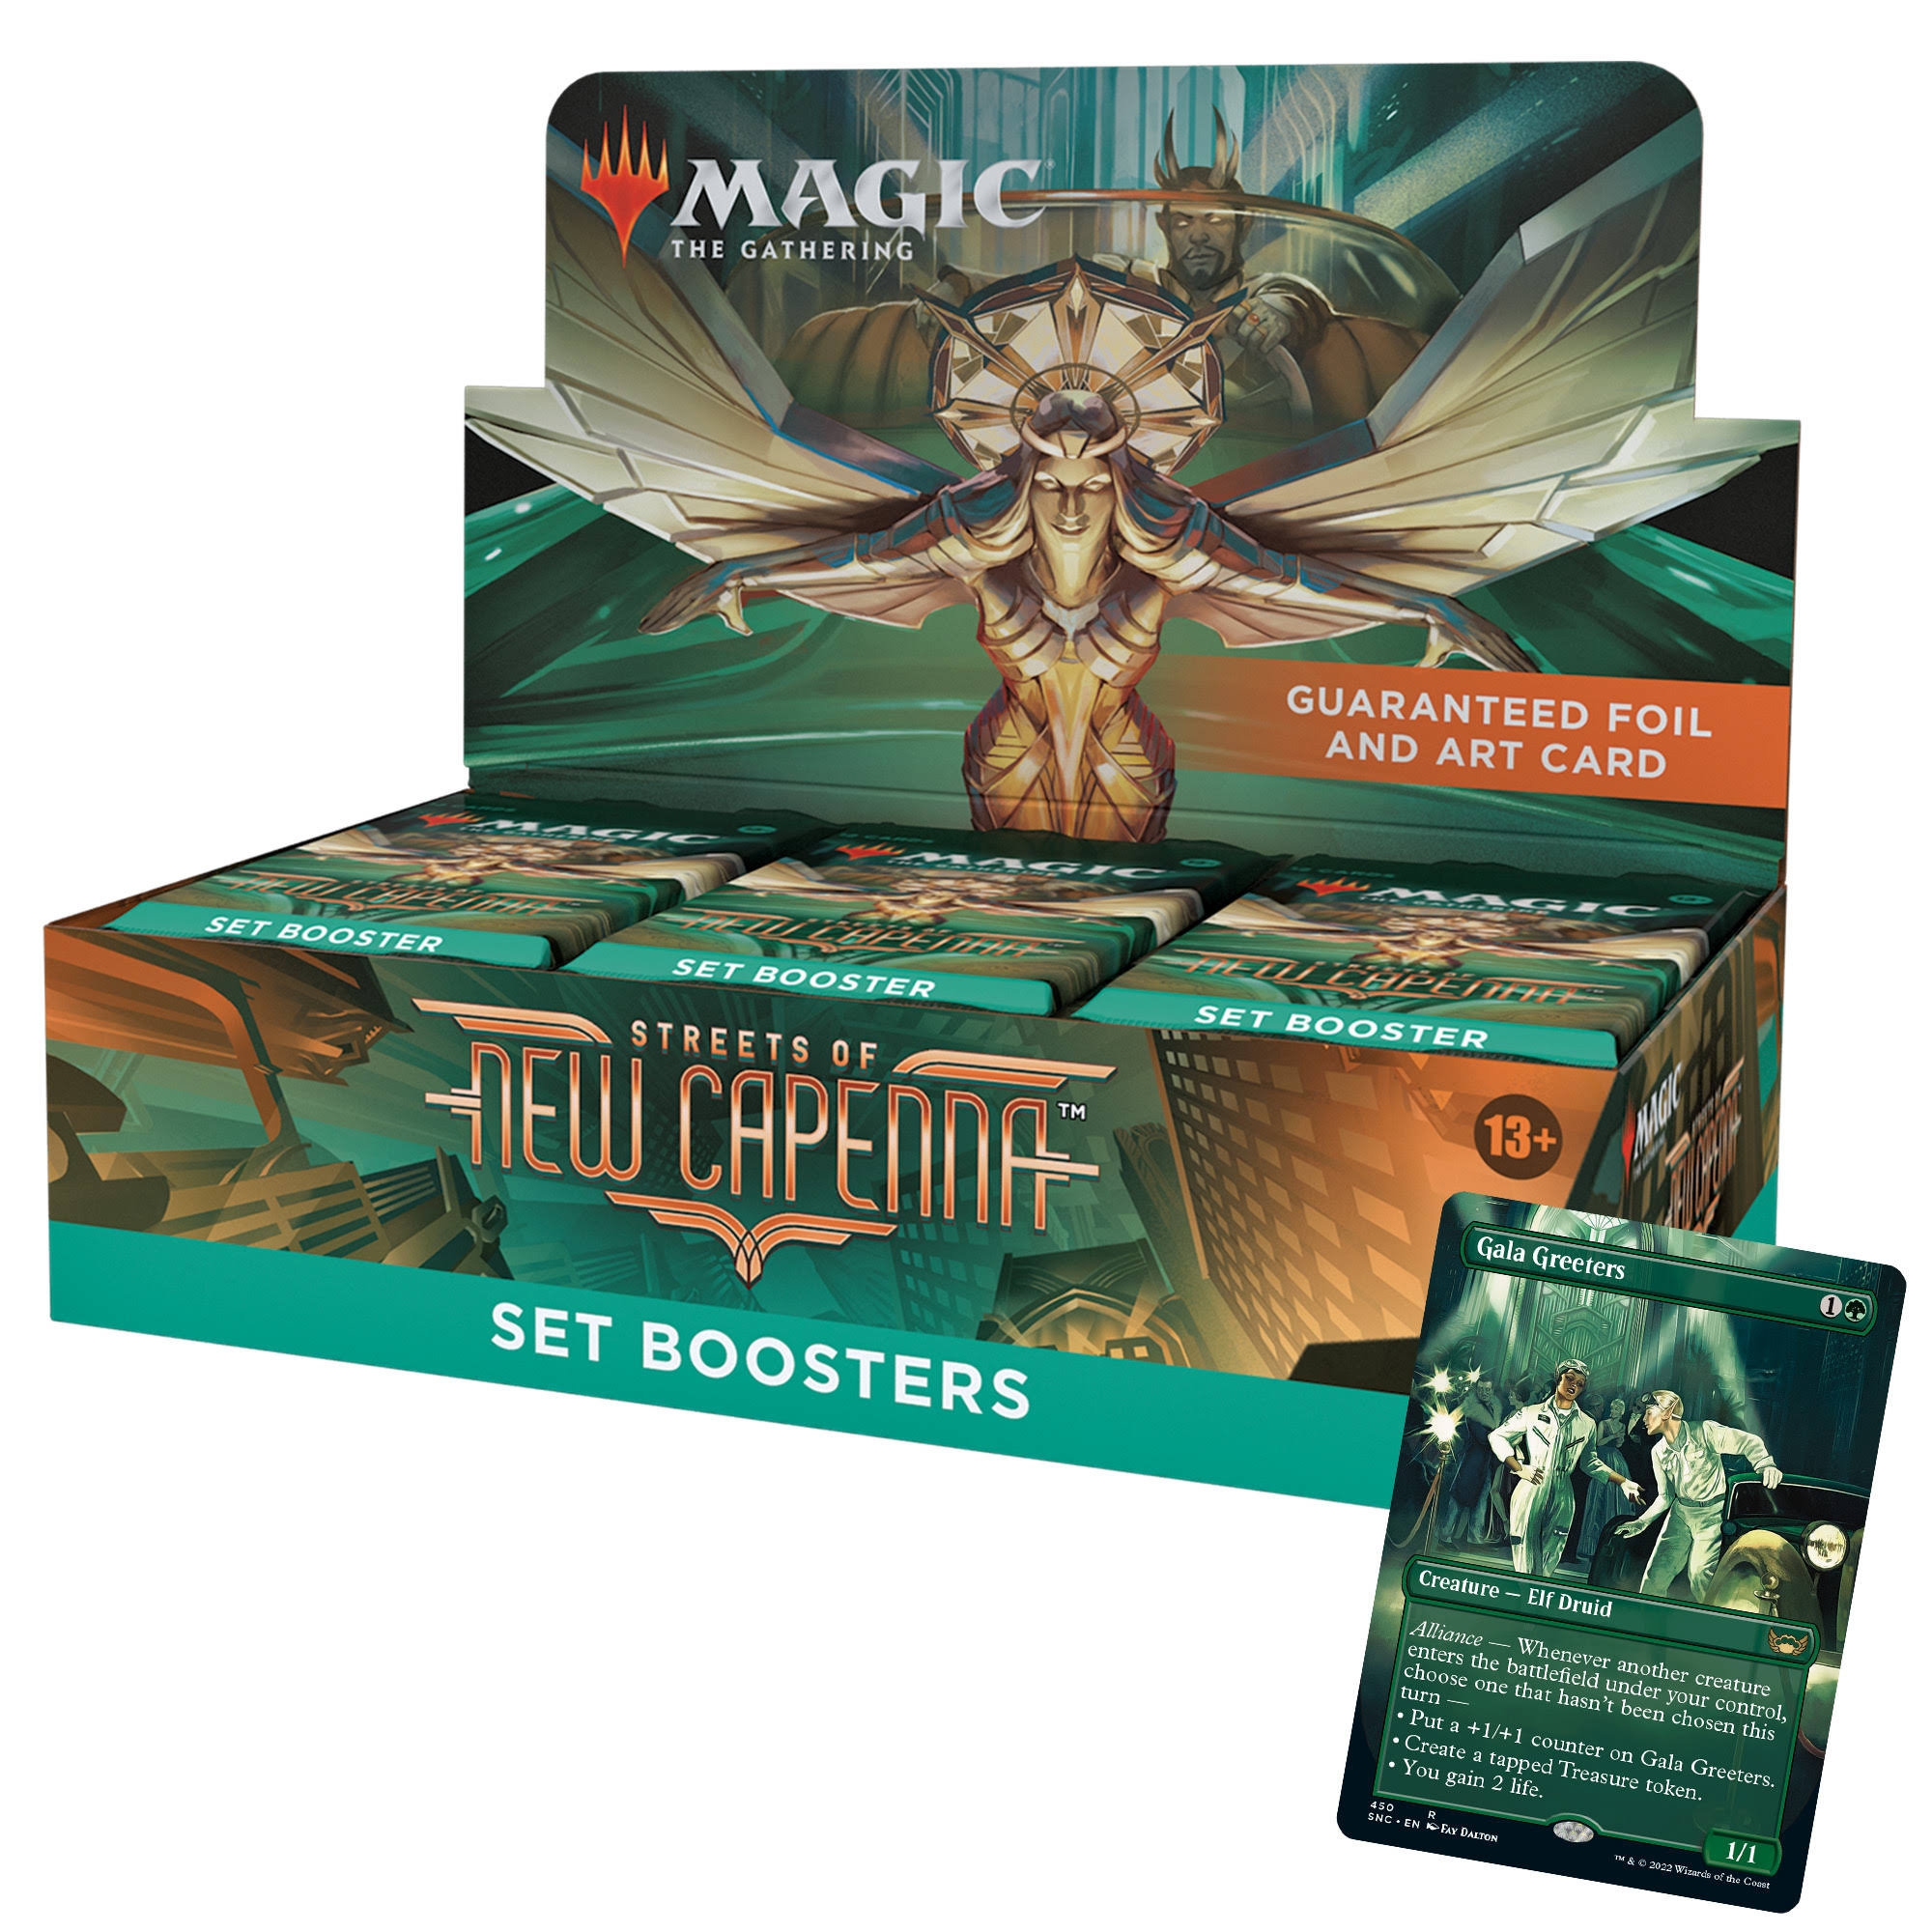 Magic The Gathering - Streets of New Capenna - Set Booster Box